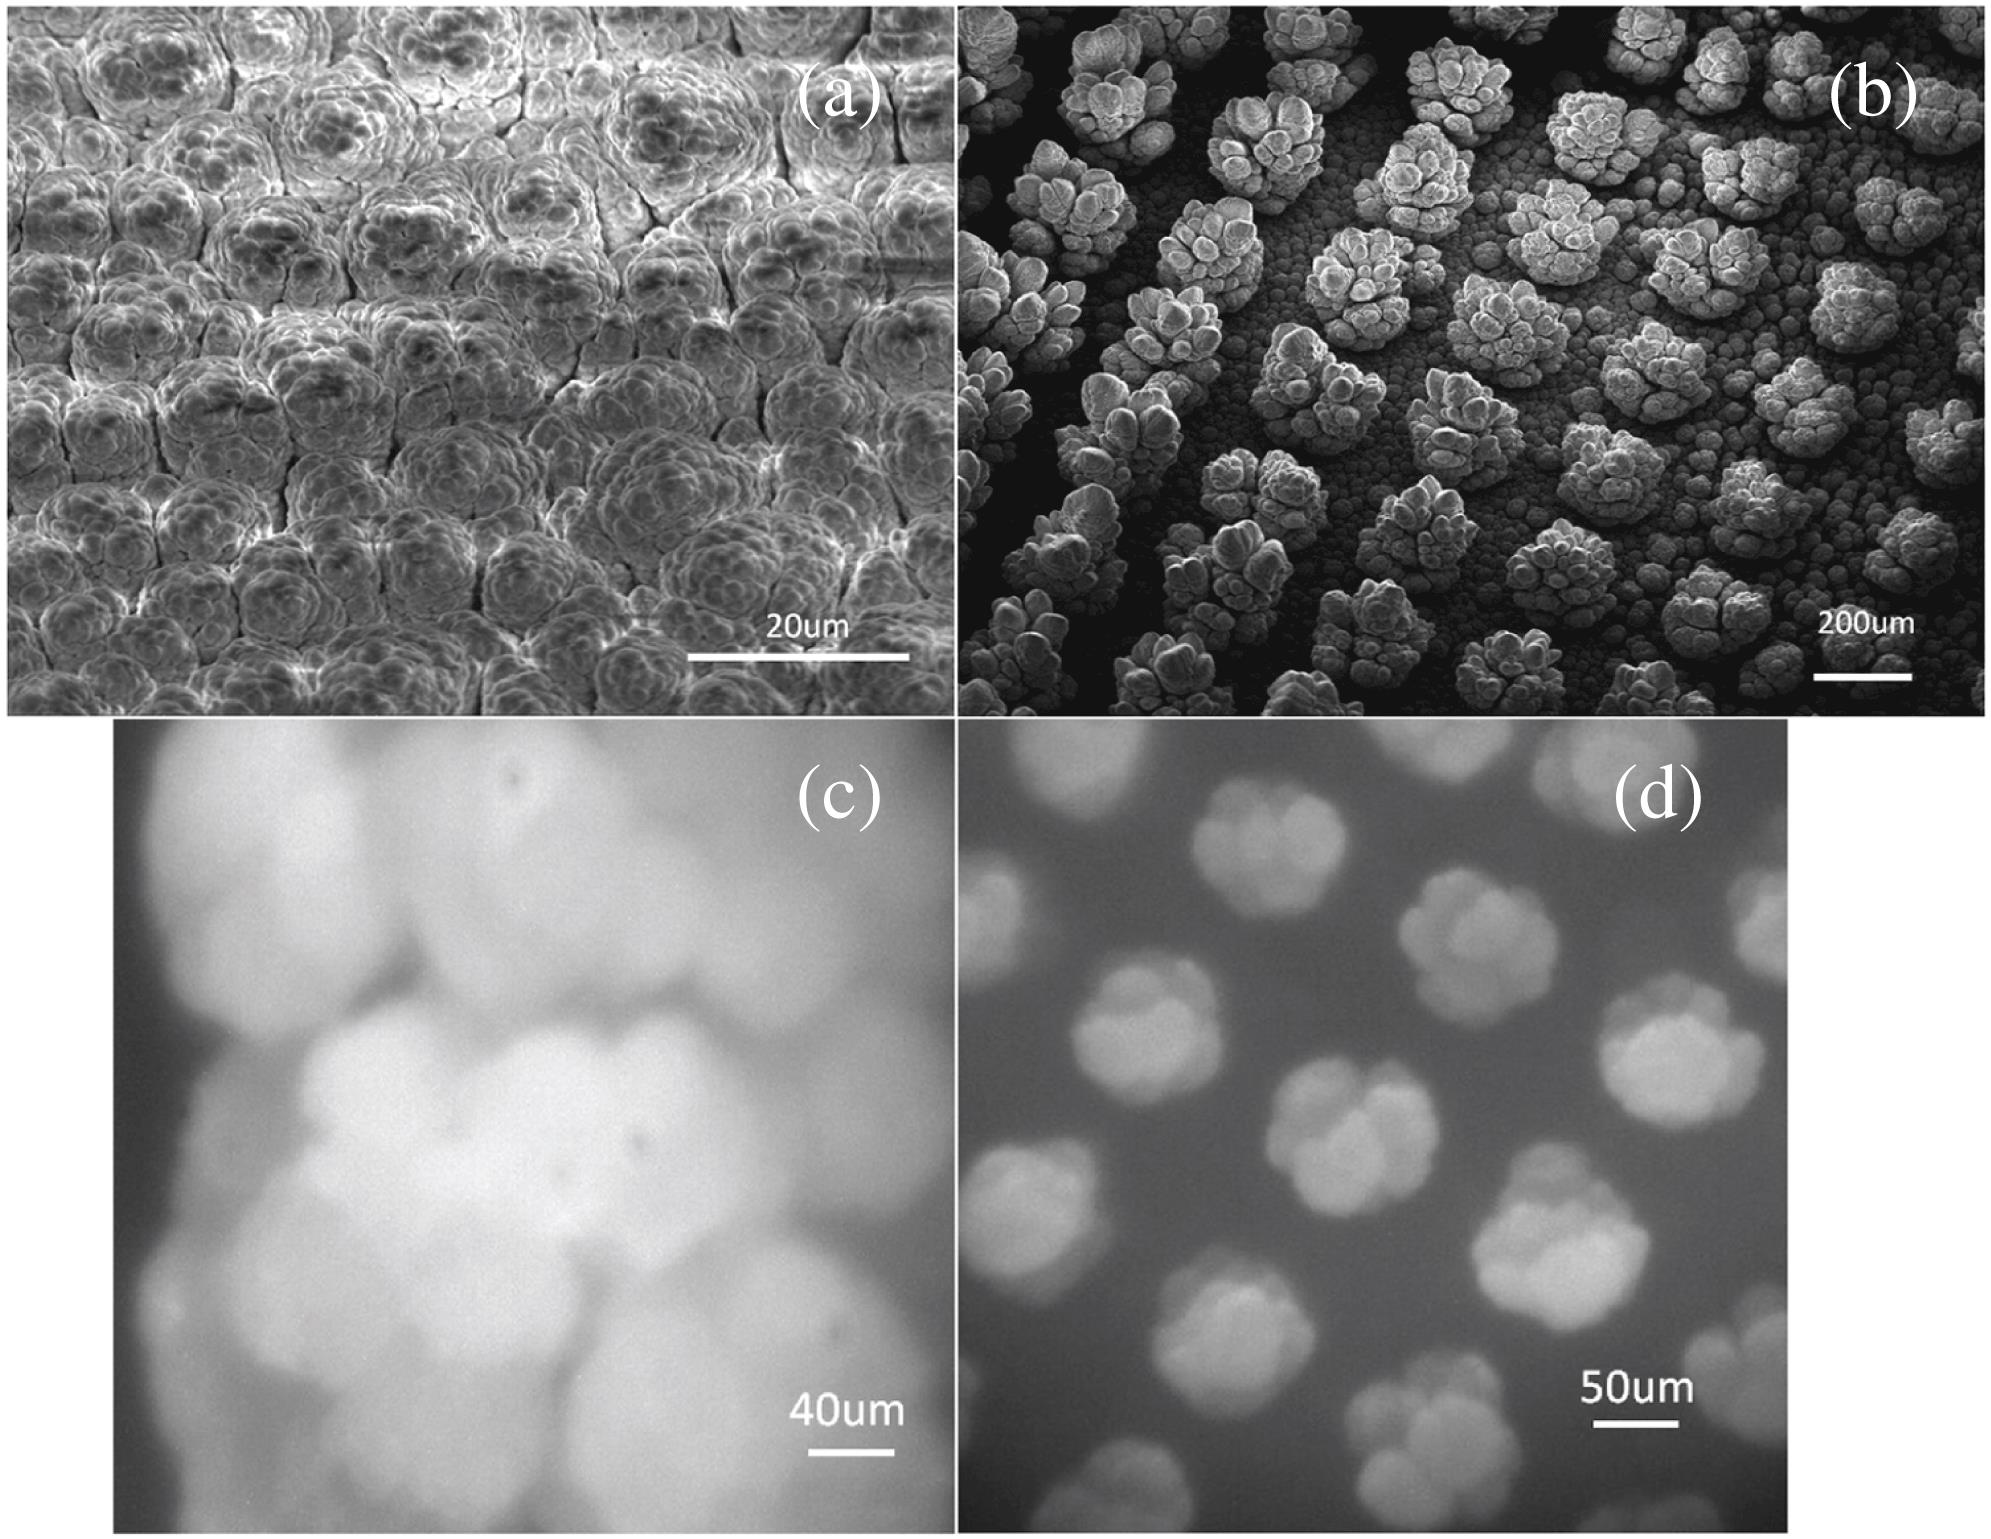 Snow morphology images. Images (a) and (c) are SEM and optical pictures of snow micro-columns without nucleation centers. Images (b) and (d) are SEM and optical pictures of snow micro-columns with nucleation centers.